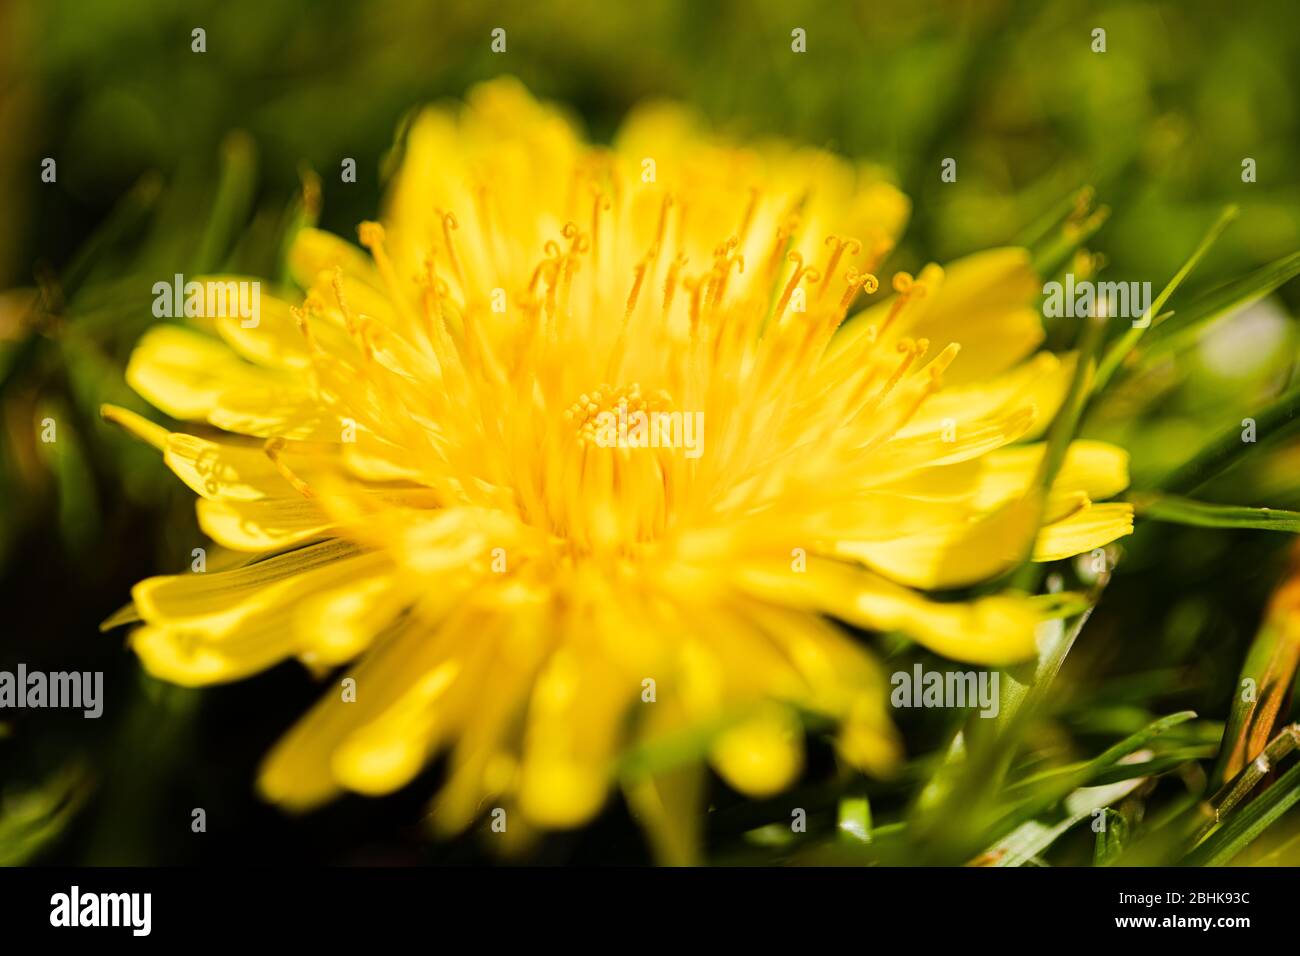 Luton, United Kingdom - April 26th, 2020: Macro Close-Up shot of a Dandelion. You experience the pollen and small fragile texture of a dandelion Stock Photo